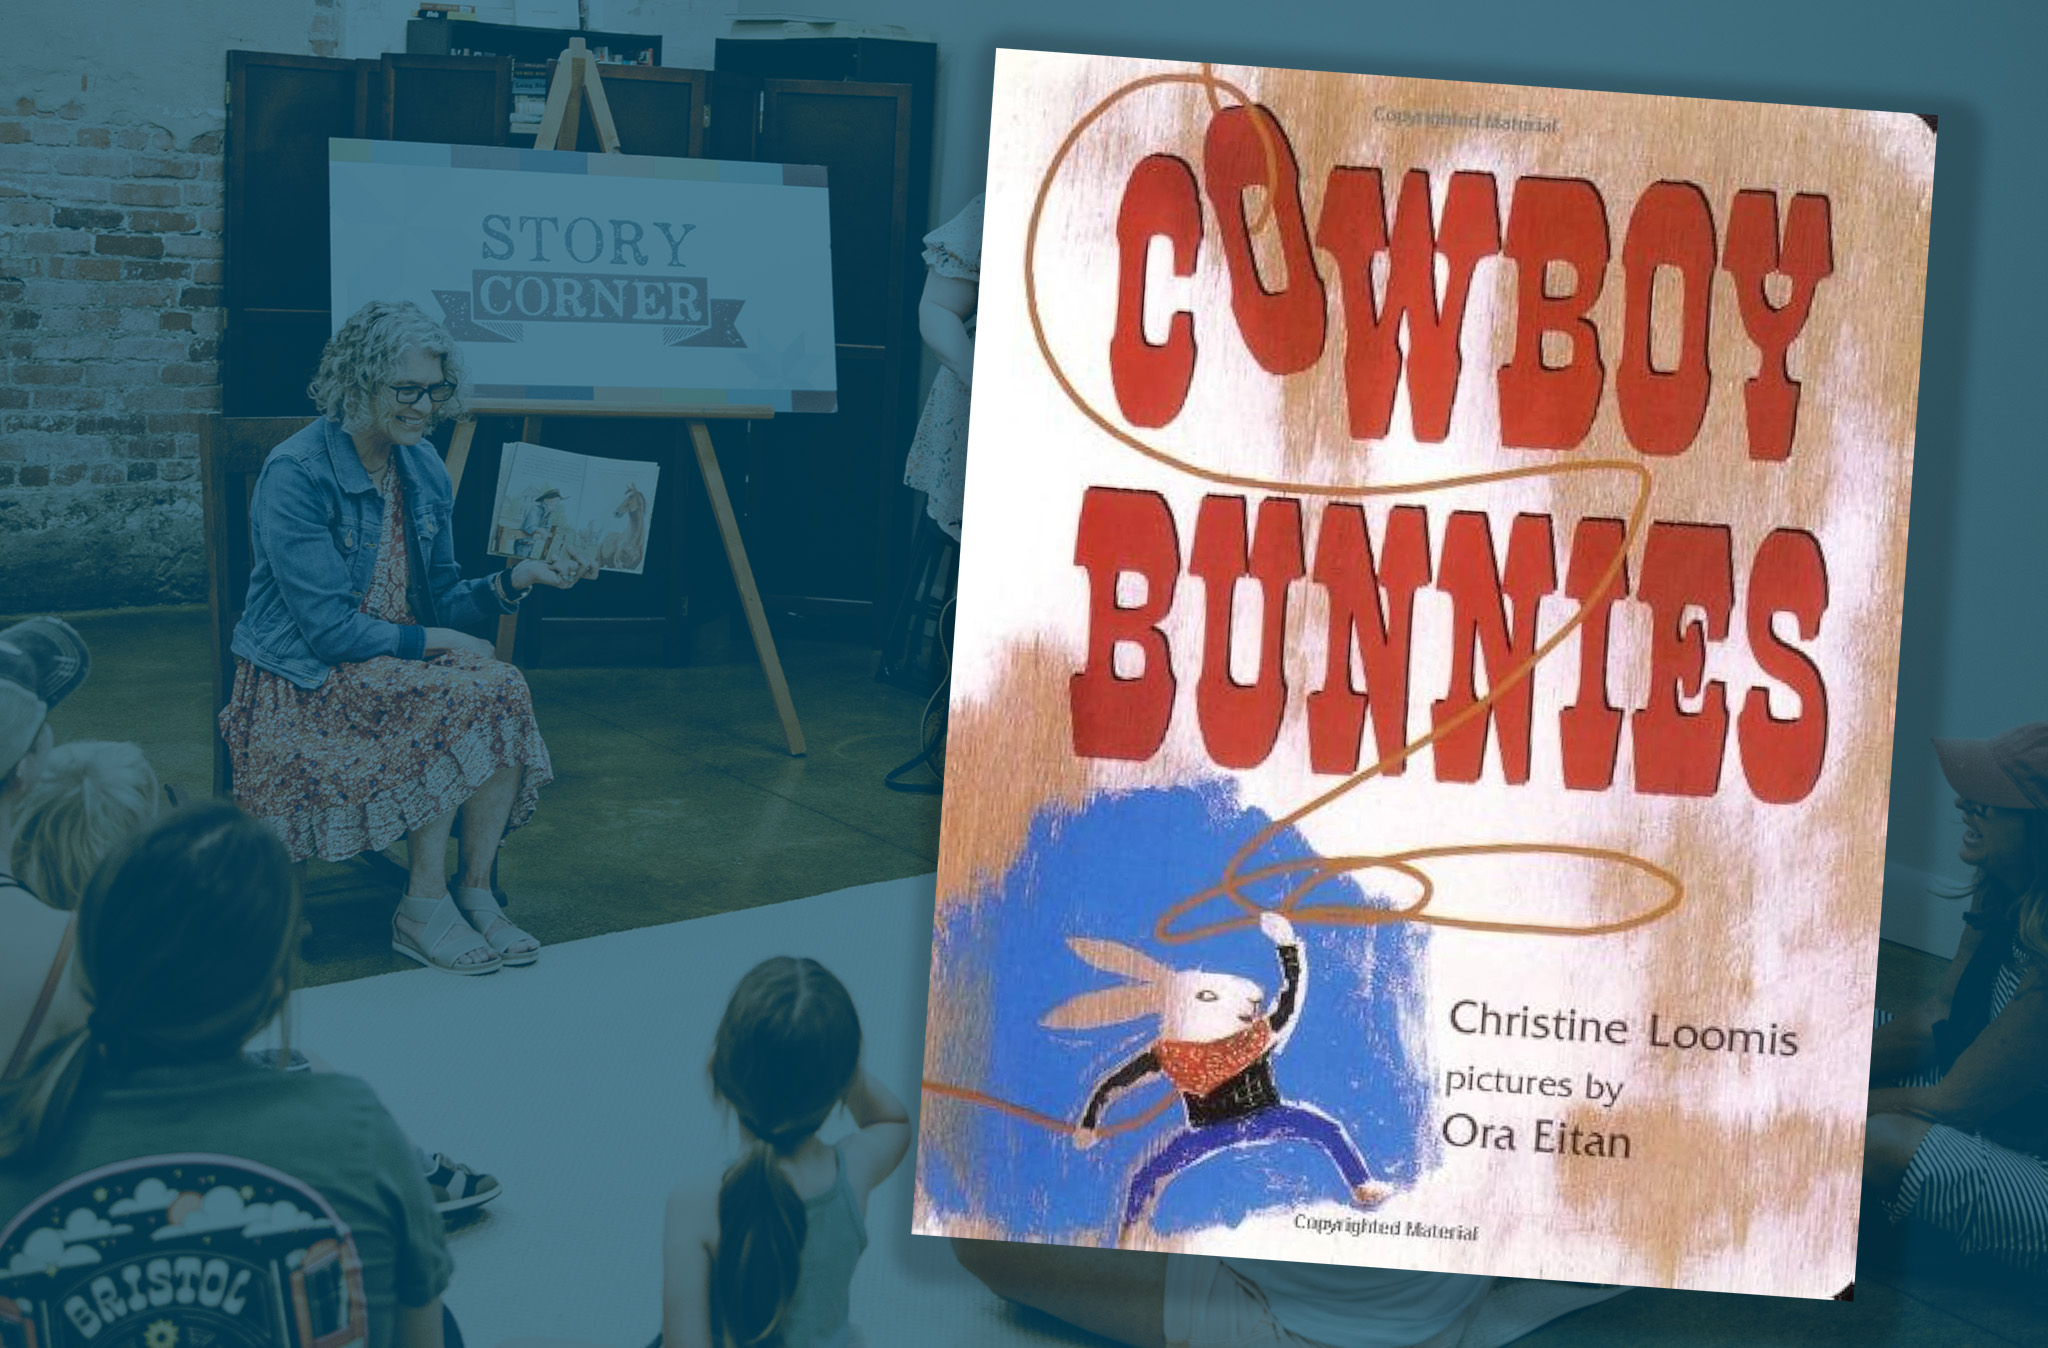 Graphic depicting book cover for "Cowboy Bunnies"